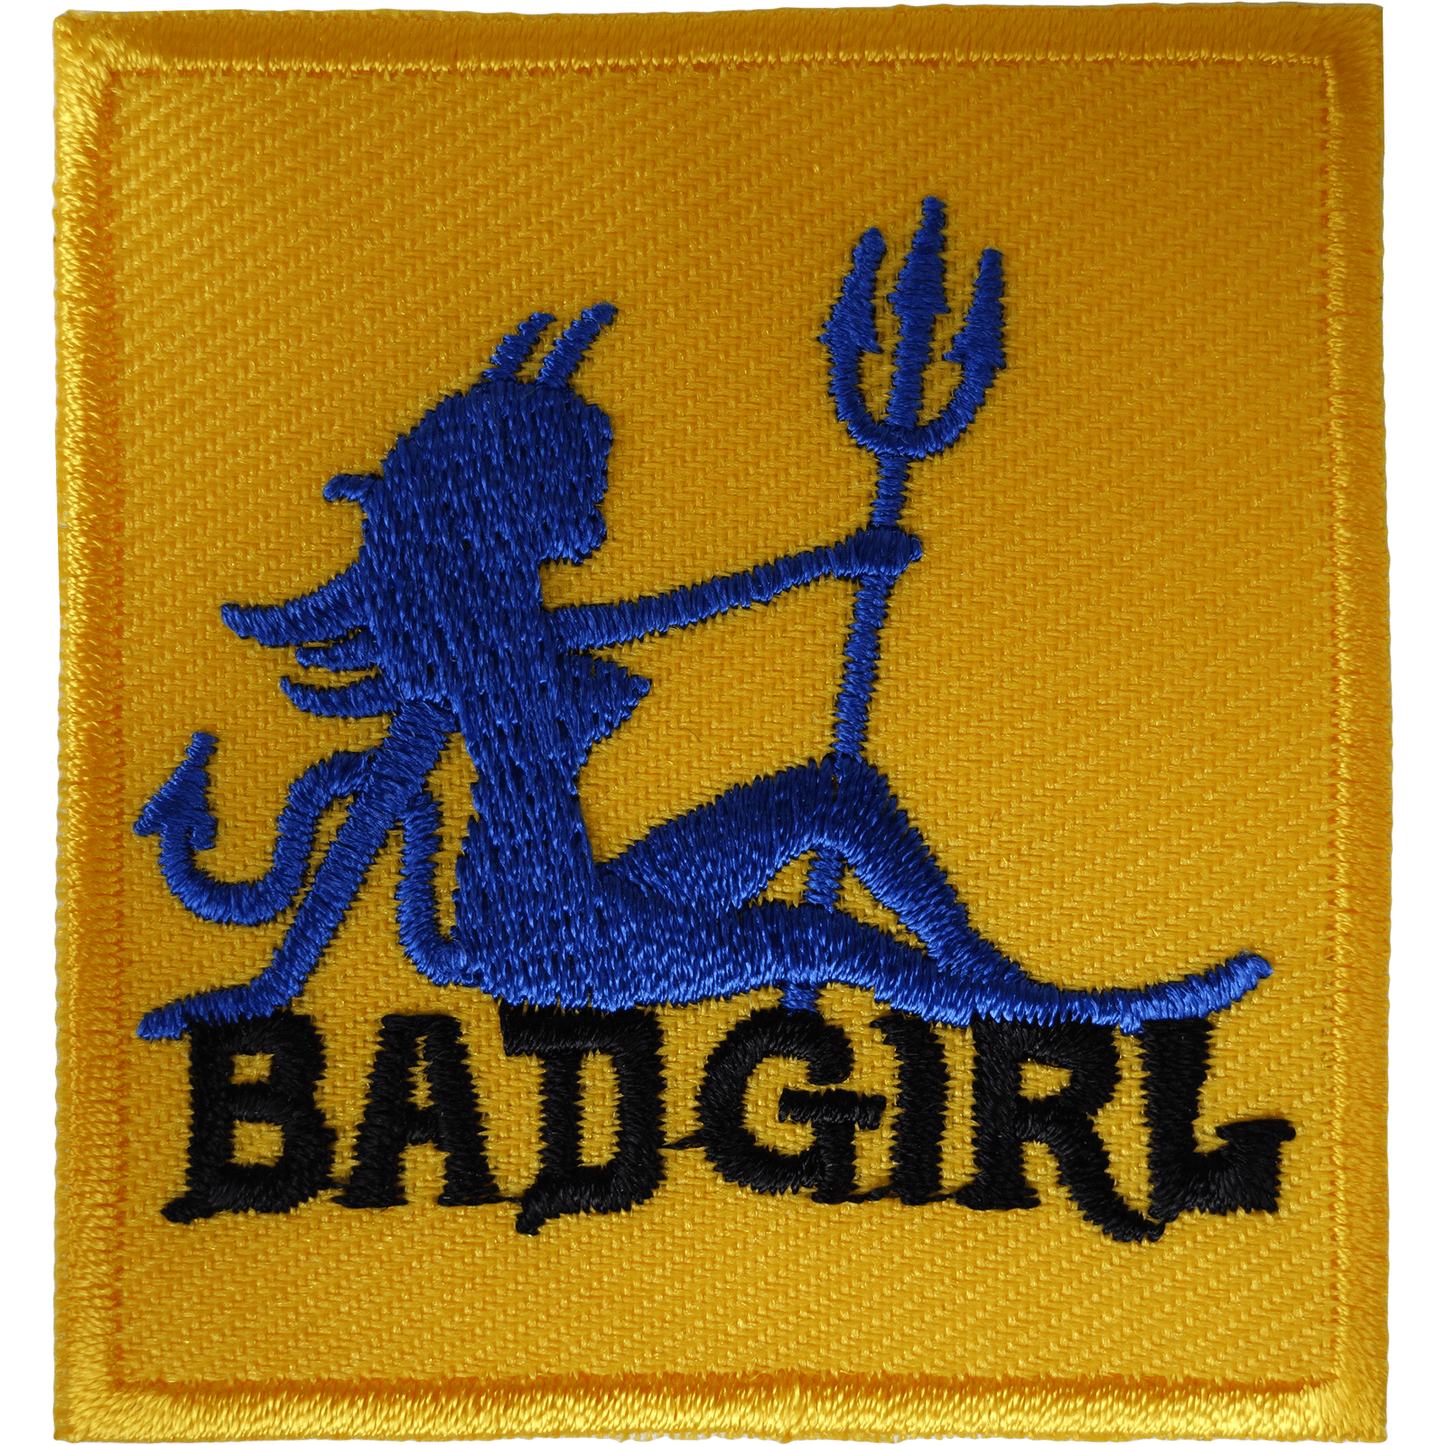 Bad Girl Patch Iron Sew On Jacket Jeans Bag T Shirt Sexy Devil Embroidered Badge